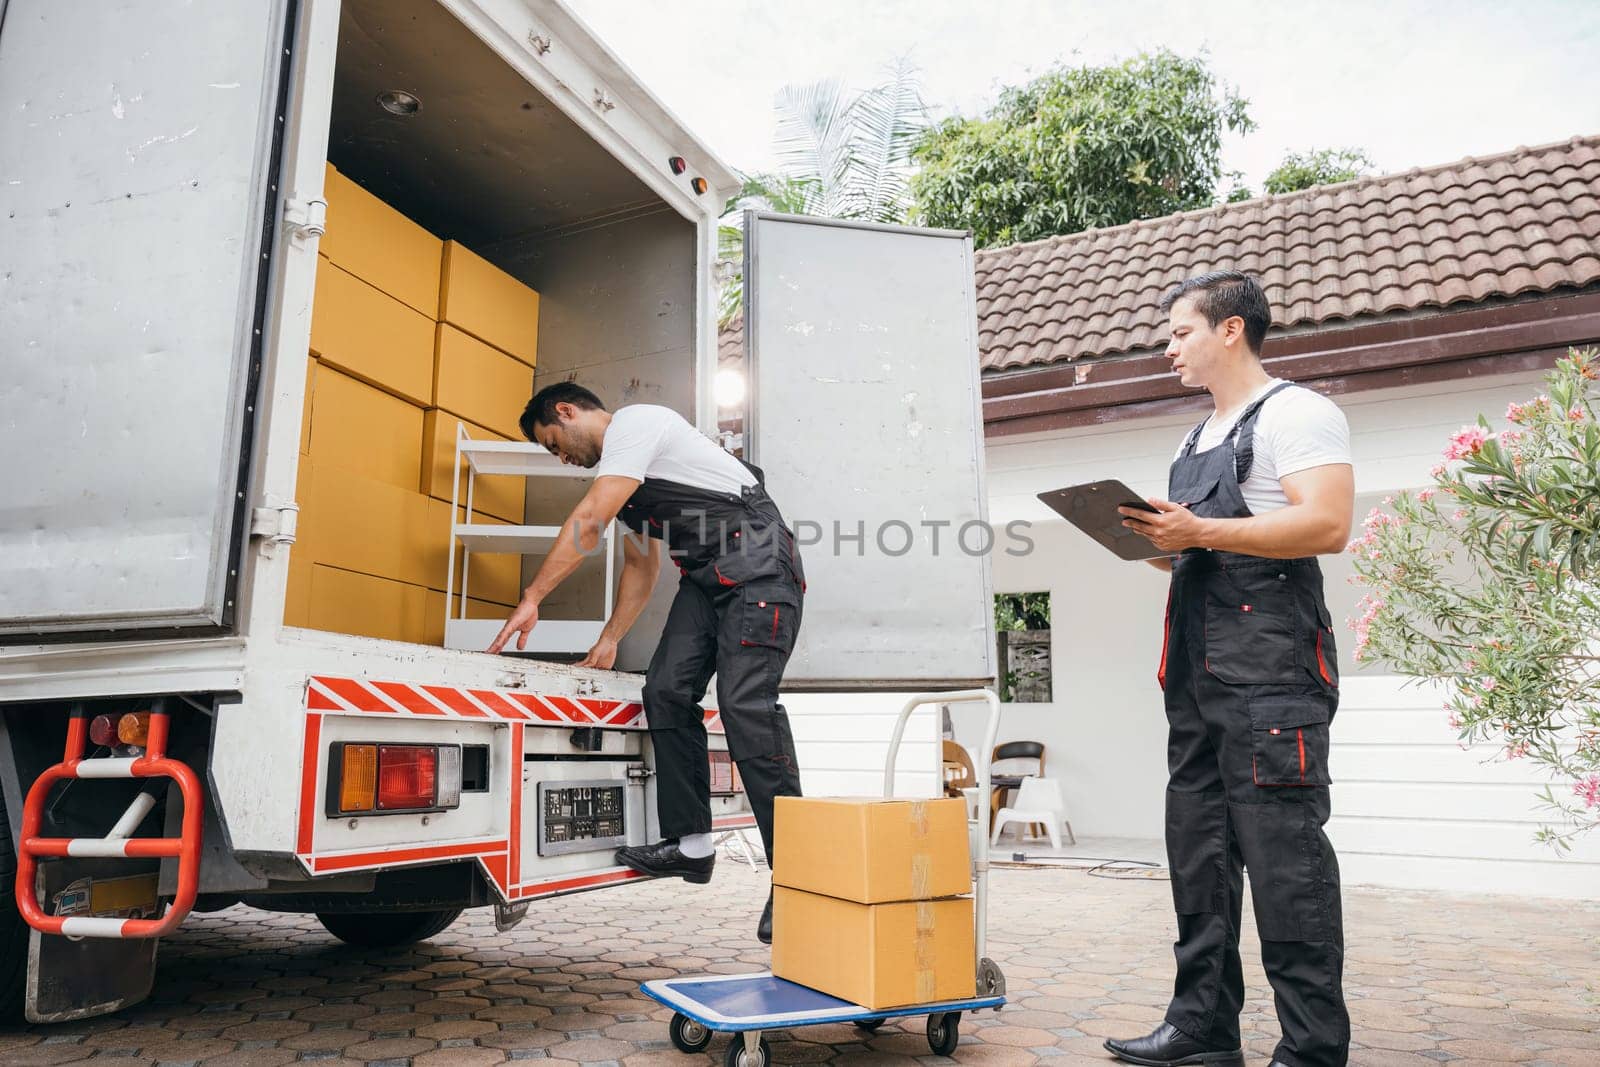 Uniformed removal company workers unload boxes and furniture from the truck exhibiting excellent teamwork. Their dedication guarantees a smooth move into the new home ensuring happiness. Moving Day by Sorapop